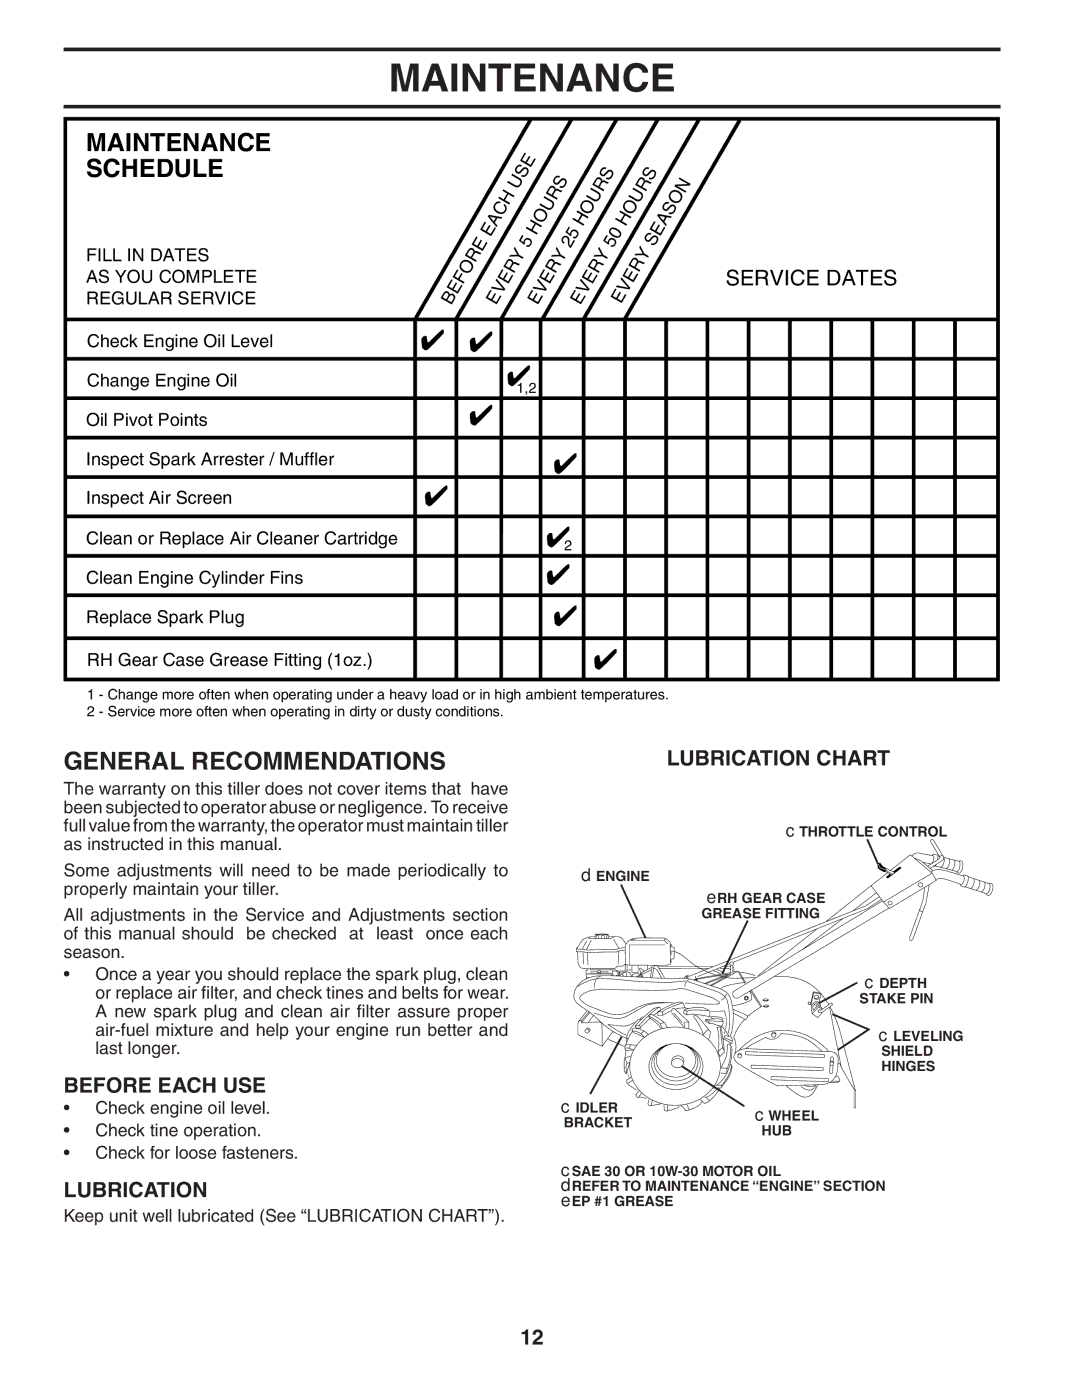 Maxim MXR500 owner manual Maintenance, General Recommendations, Before Each USE, Lubrication Chart 